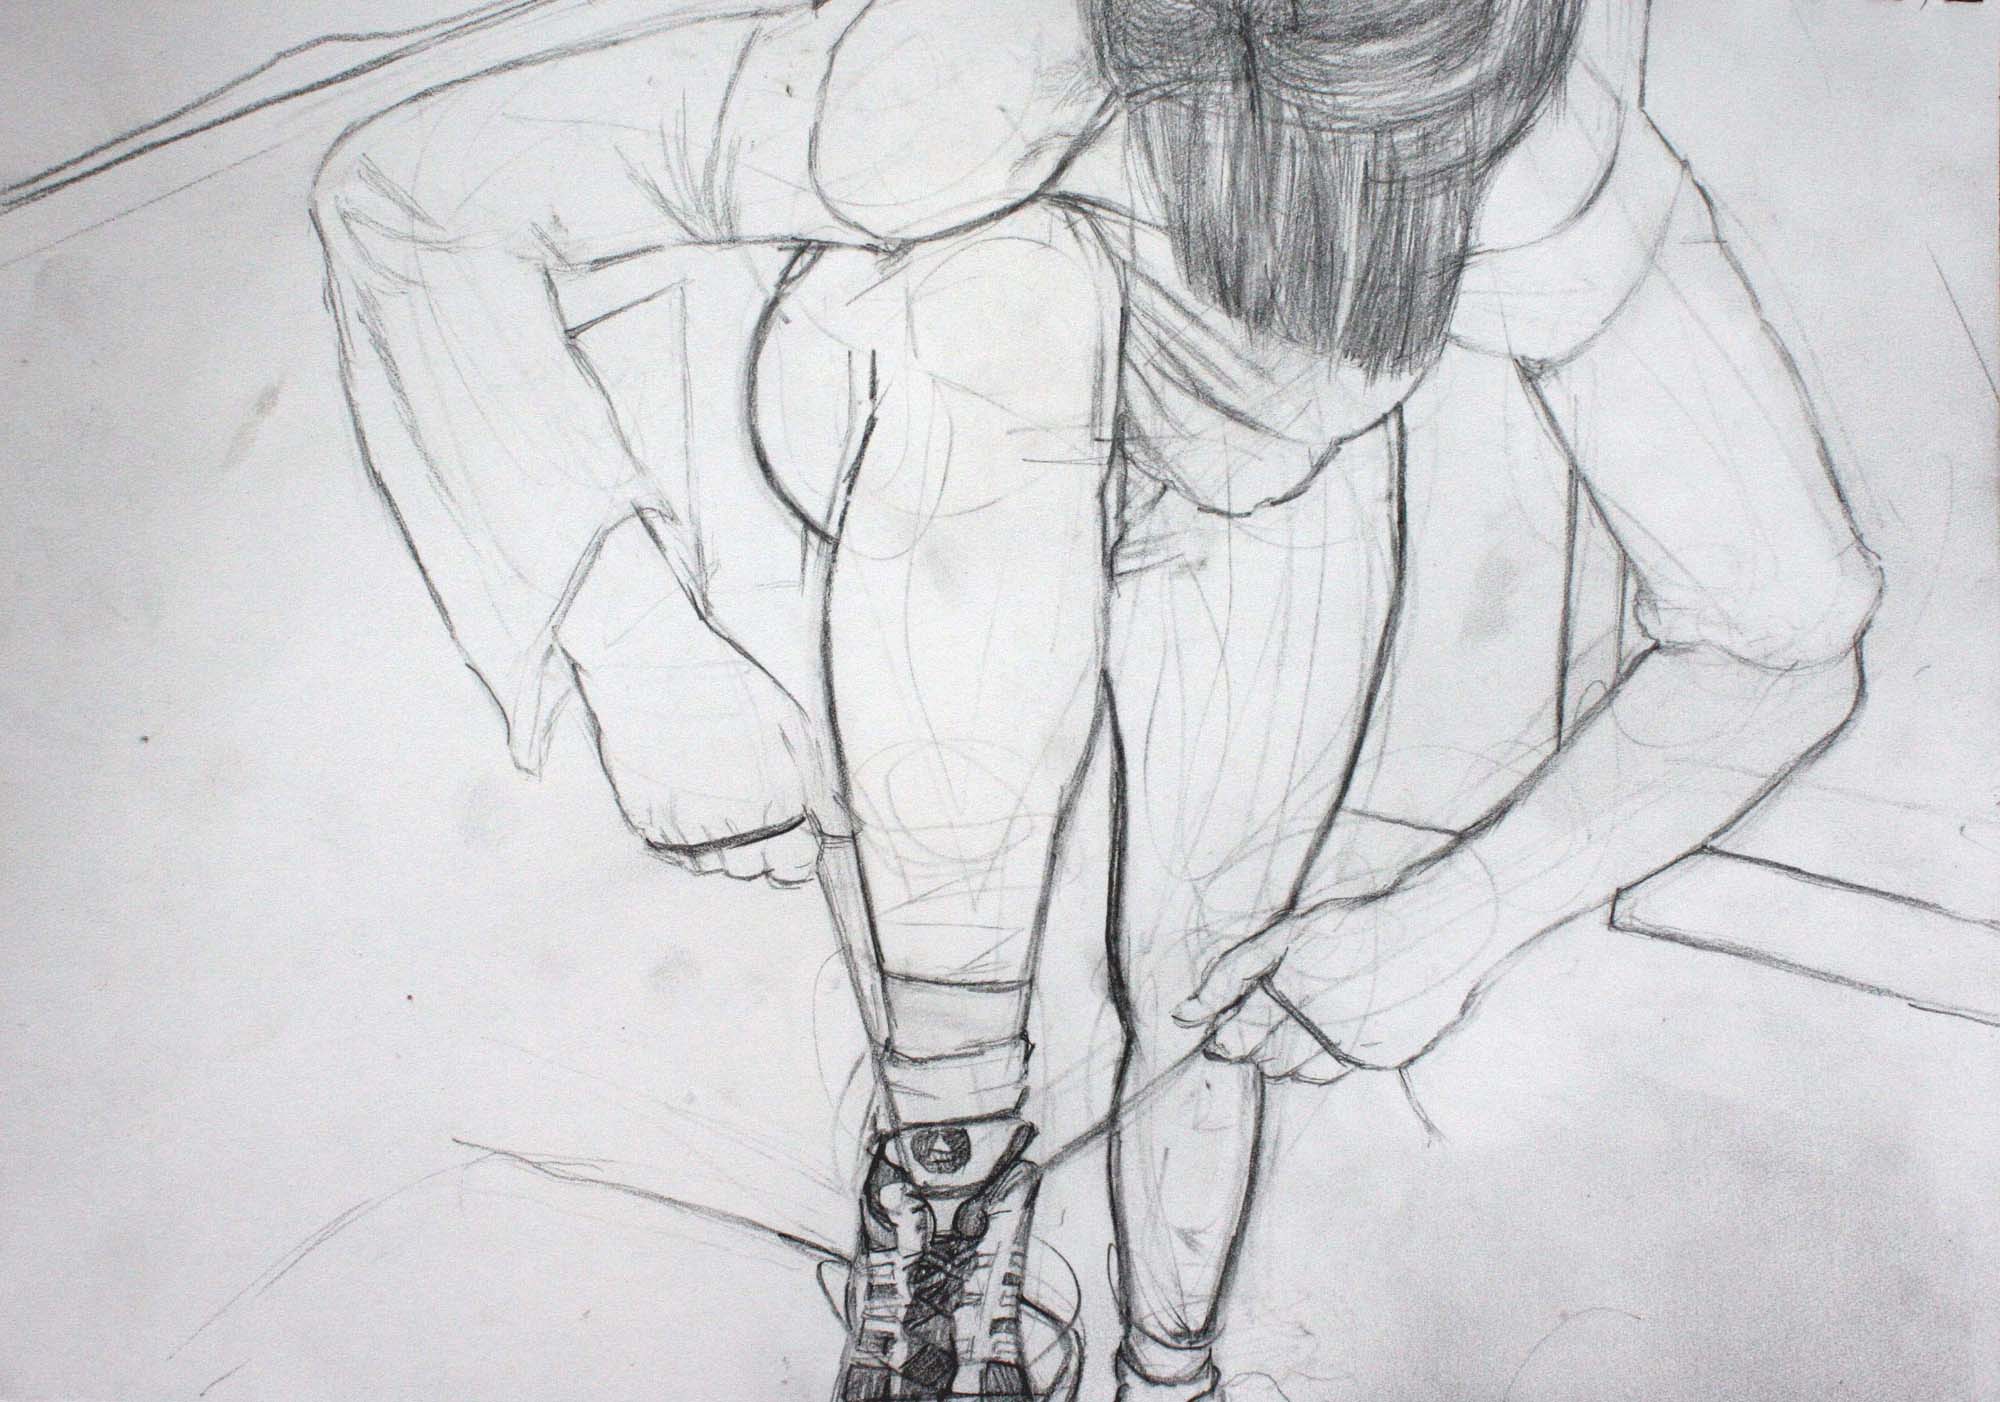  Tying Her Shoe, 2010. Graphite on paper, 9 x 12" 